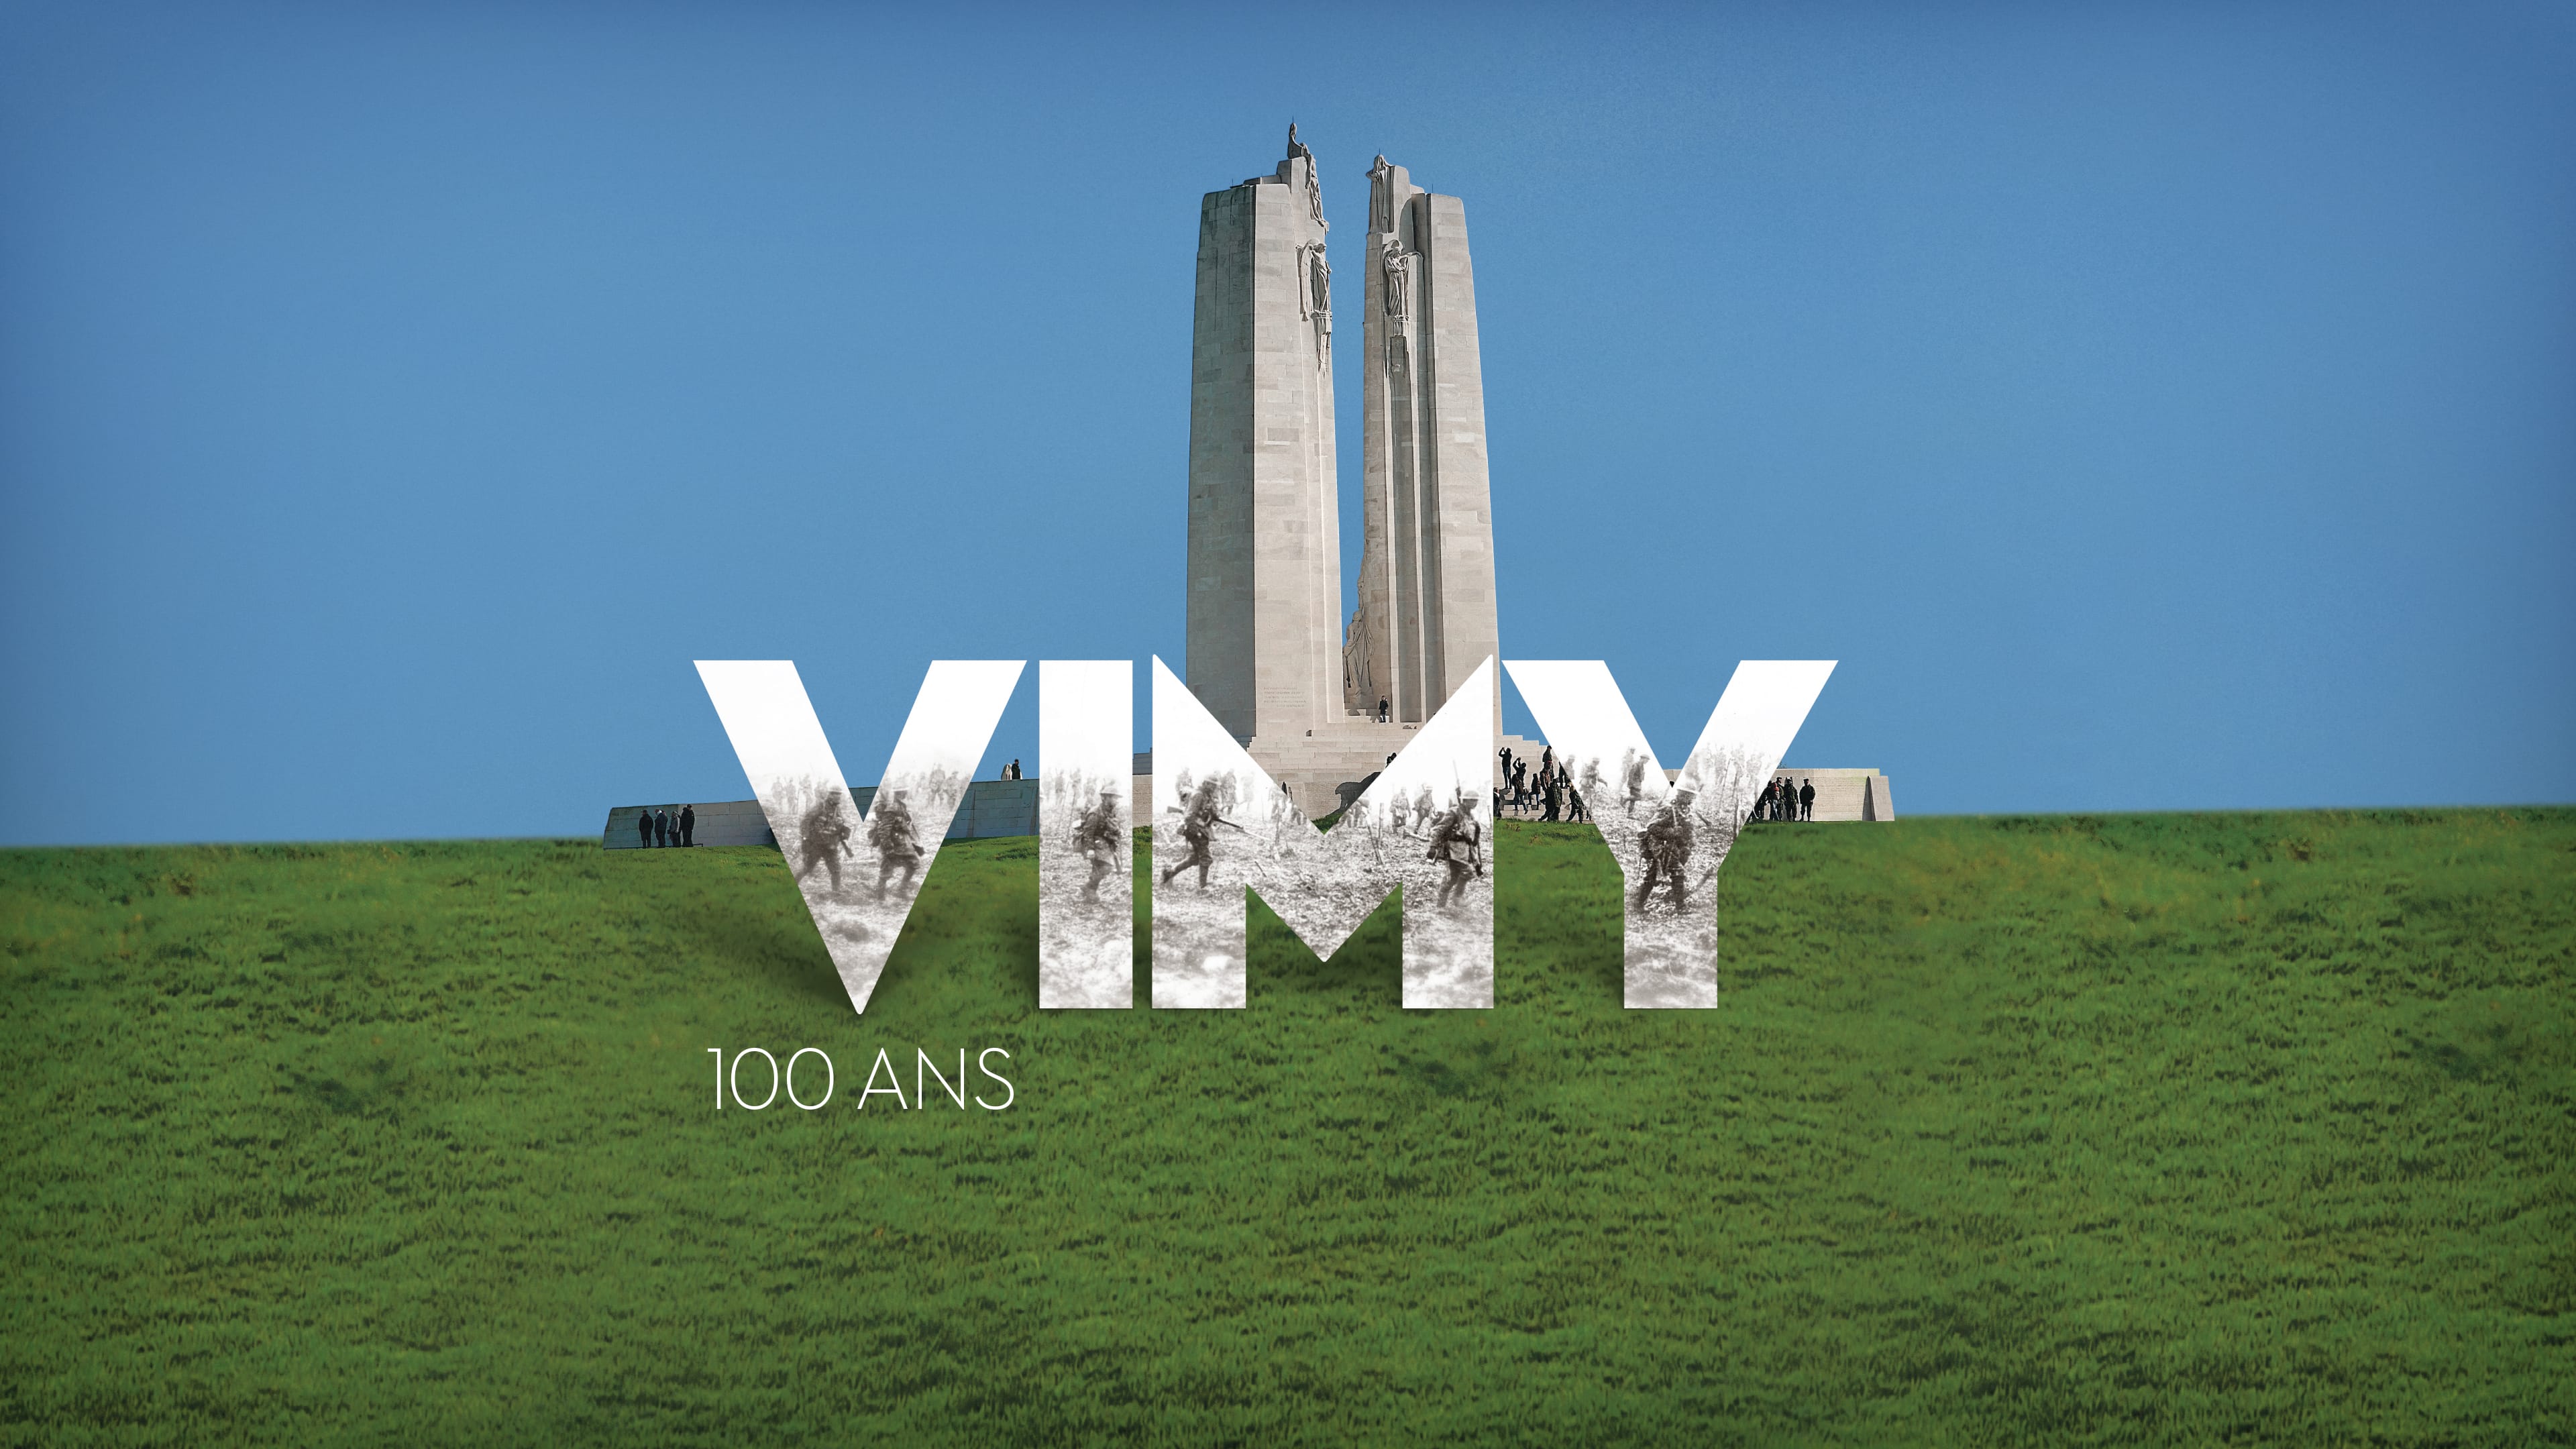 The limestone memorial and surrounding green field of the Canadian National Vimy Memorial. The words Vimy - 100 years overlaid on top. A black-and-white photograph of soldiers in at the Battle of Vimy Ridge shows through the word Vimy.